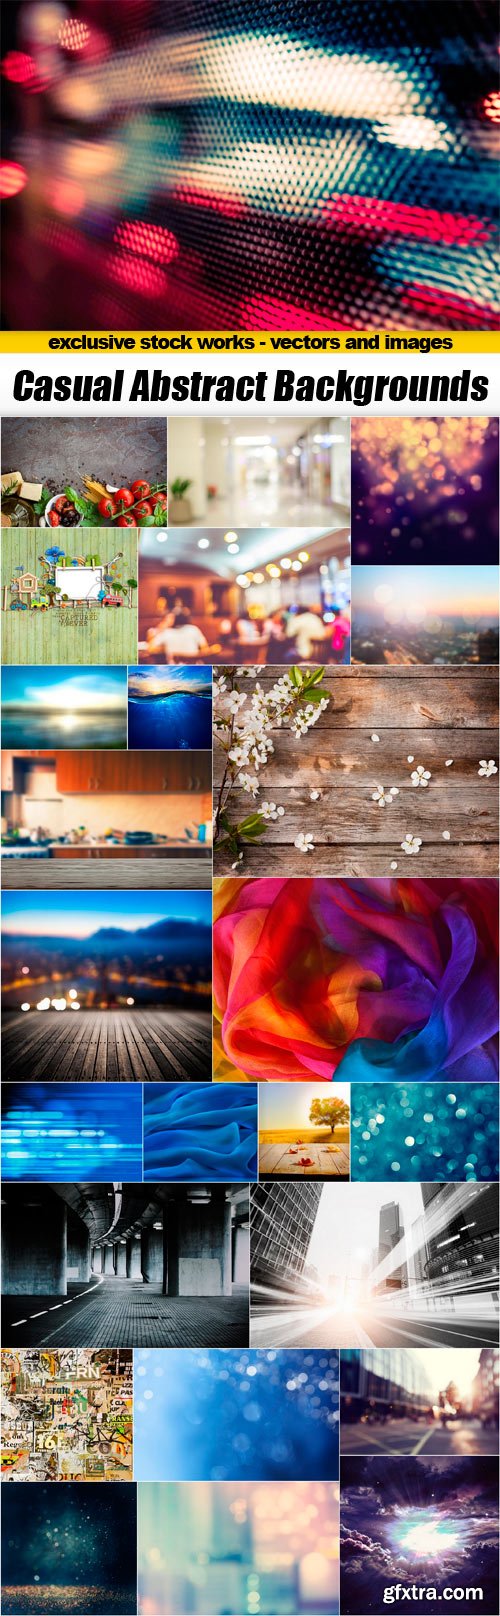 Casual Abstract Backgrounds - 25 JPEG